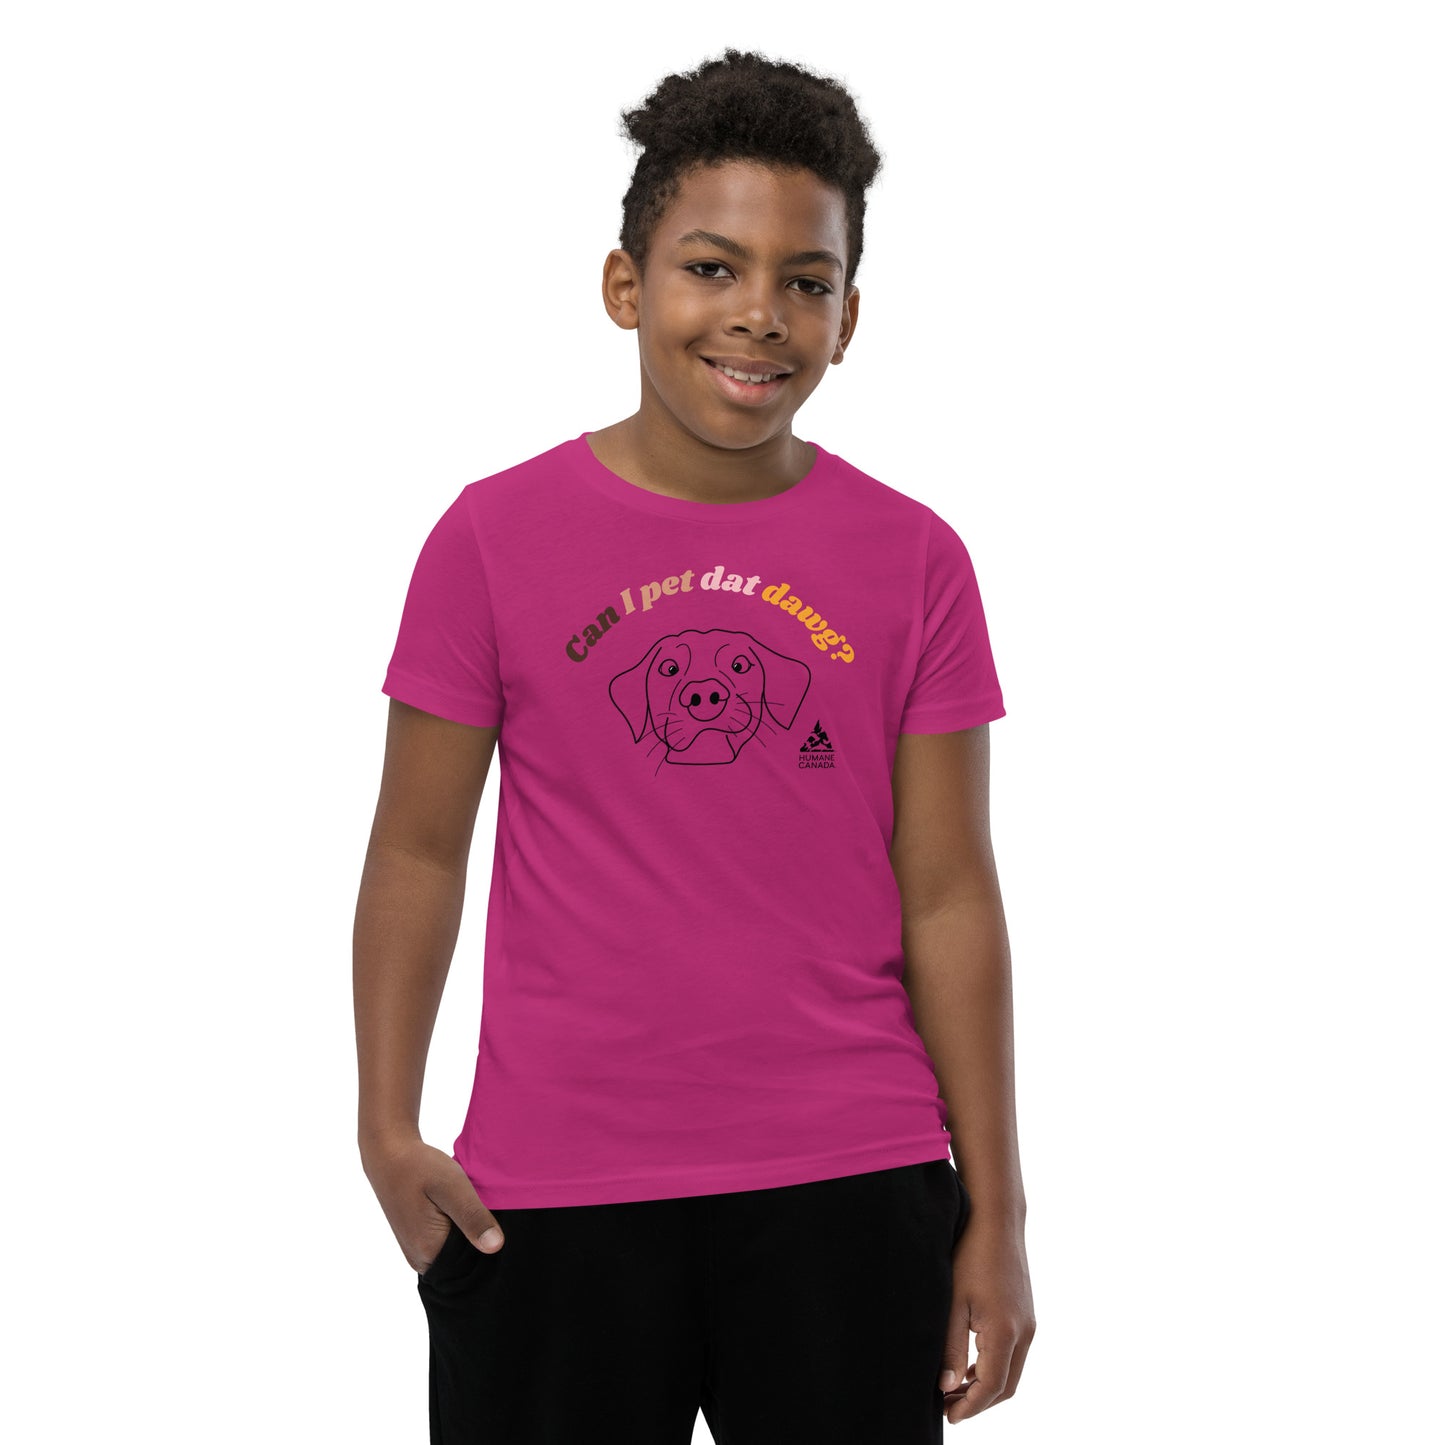 Can I Pet Dat Dawg - YOUTH Short Sleeve T-Shirt